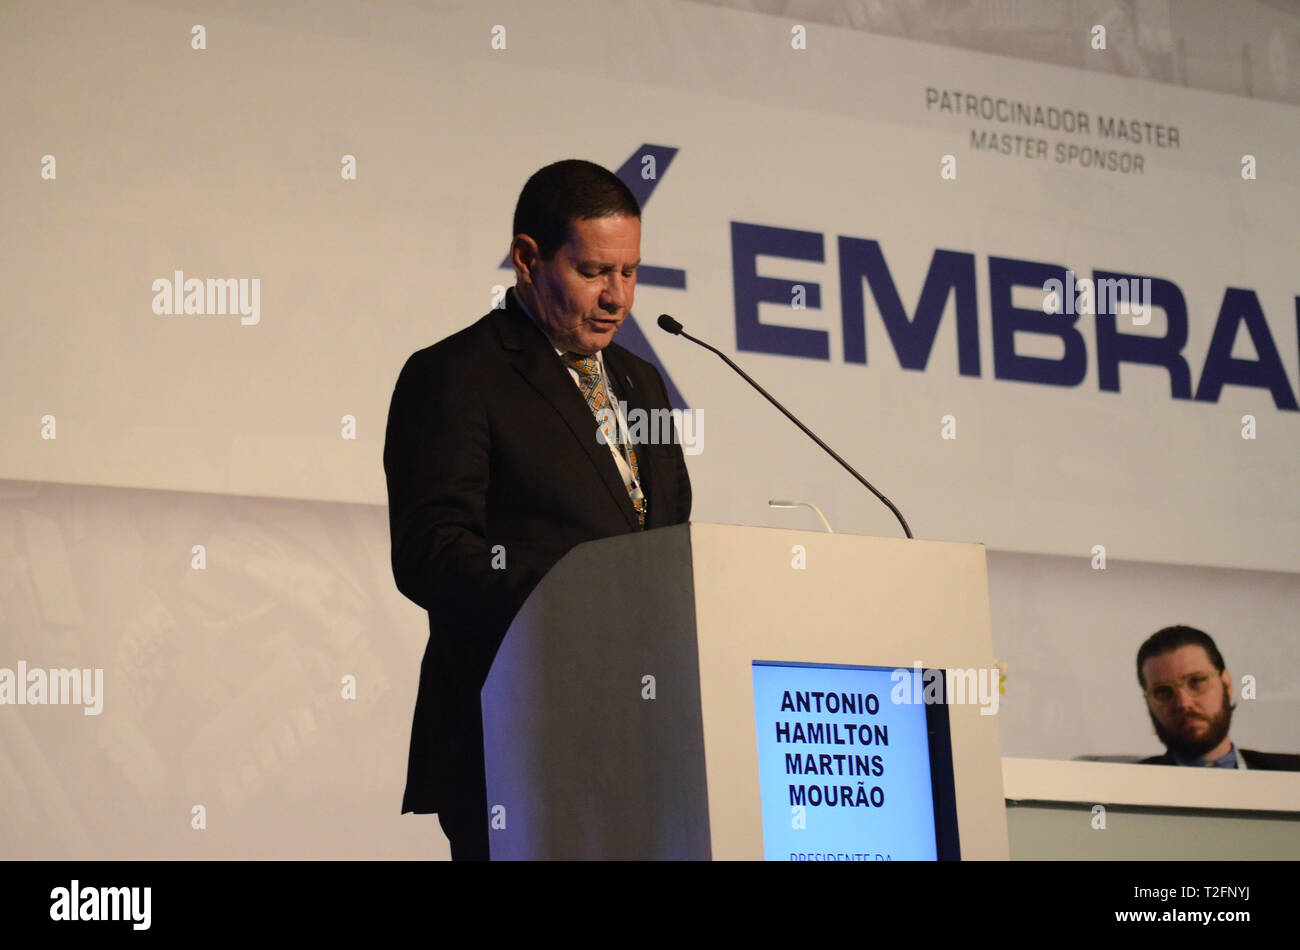 Rio De Janeiro, Brazil. 02nd Apr, 2019. Hamilton Mourão, acting president, during the LAAD Defense &amp; Security International Defense and Security Fair, the largest and most impot defense and security fair in Latin Americarica. The exhibition brings together manufacturers and suppliers of technologies for the Armed Forces, Special Forces, Police and security managers are held this Tuesday (April 02) to April (05) at the Riocentro convention and events complex in Barra da Tijuca in the western part of the city of Rio de Janeiro, RJ. Credit: Luiz Gomes/FotoArena/Alamy Live News Stock Photo